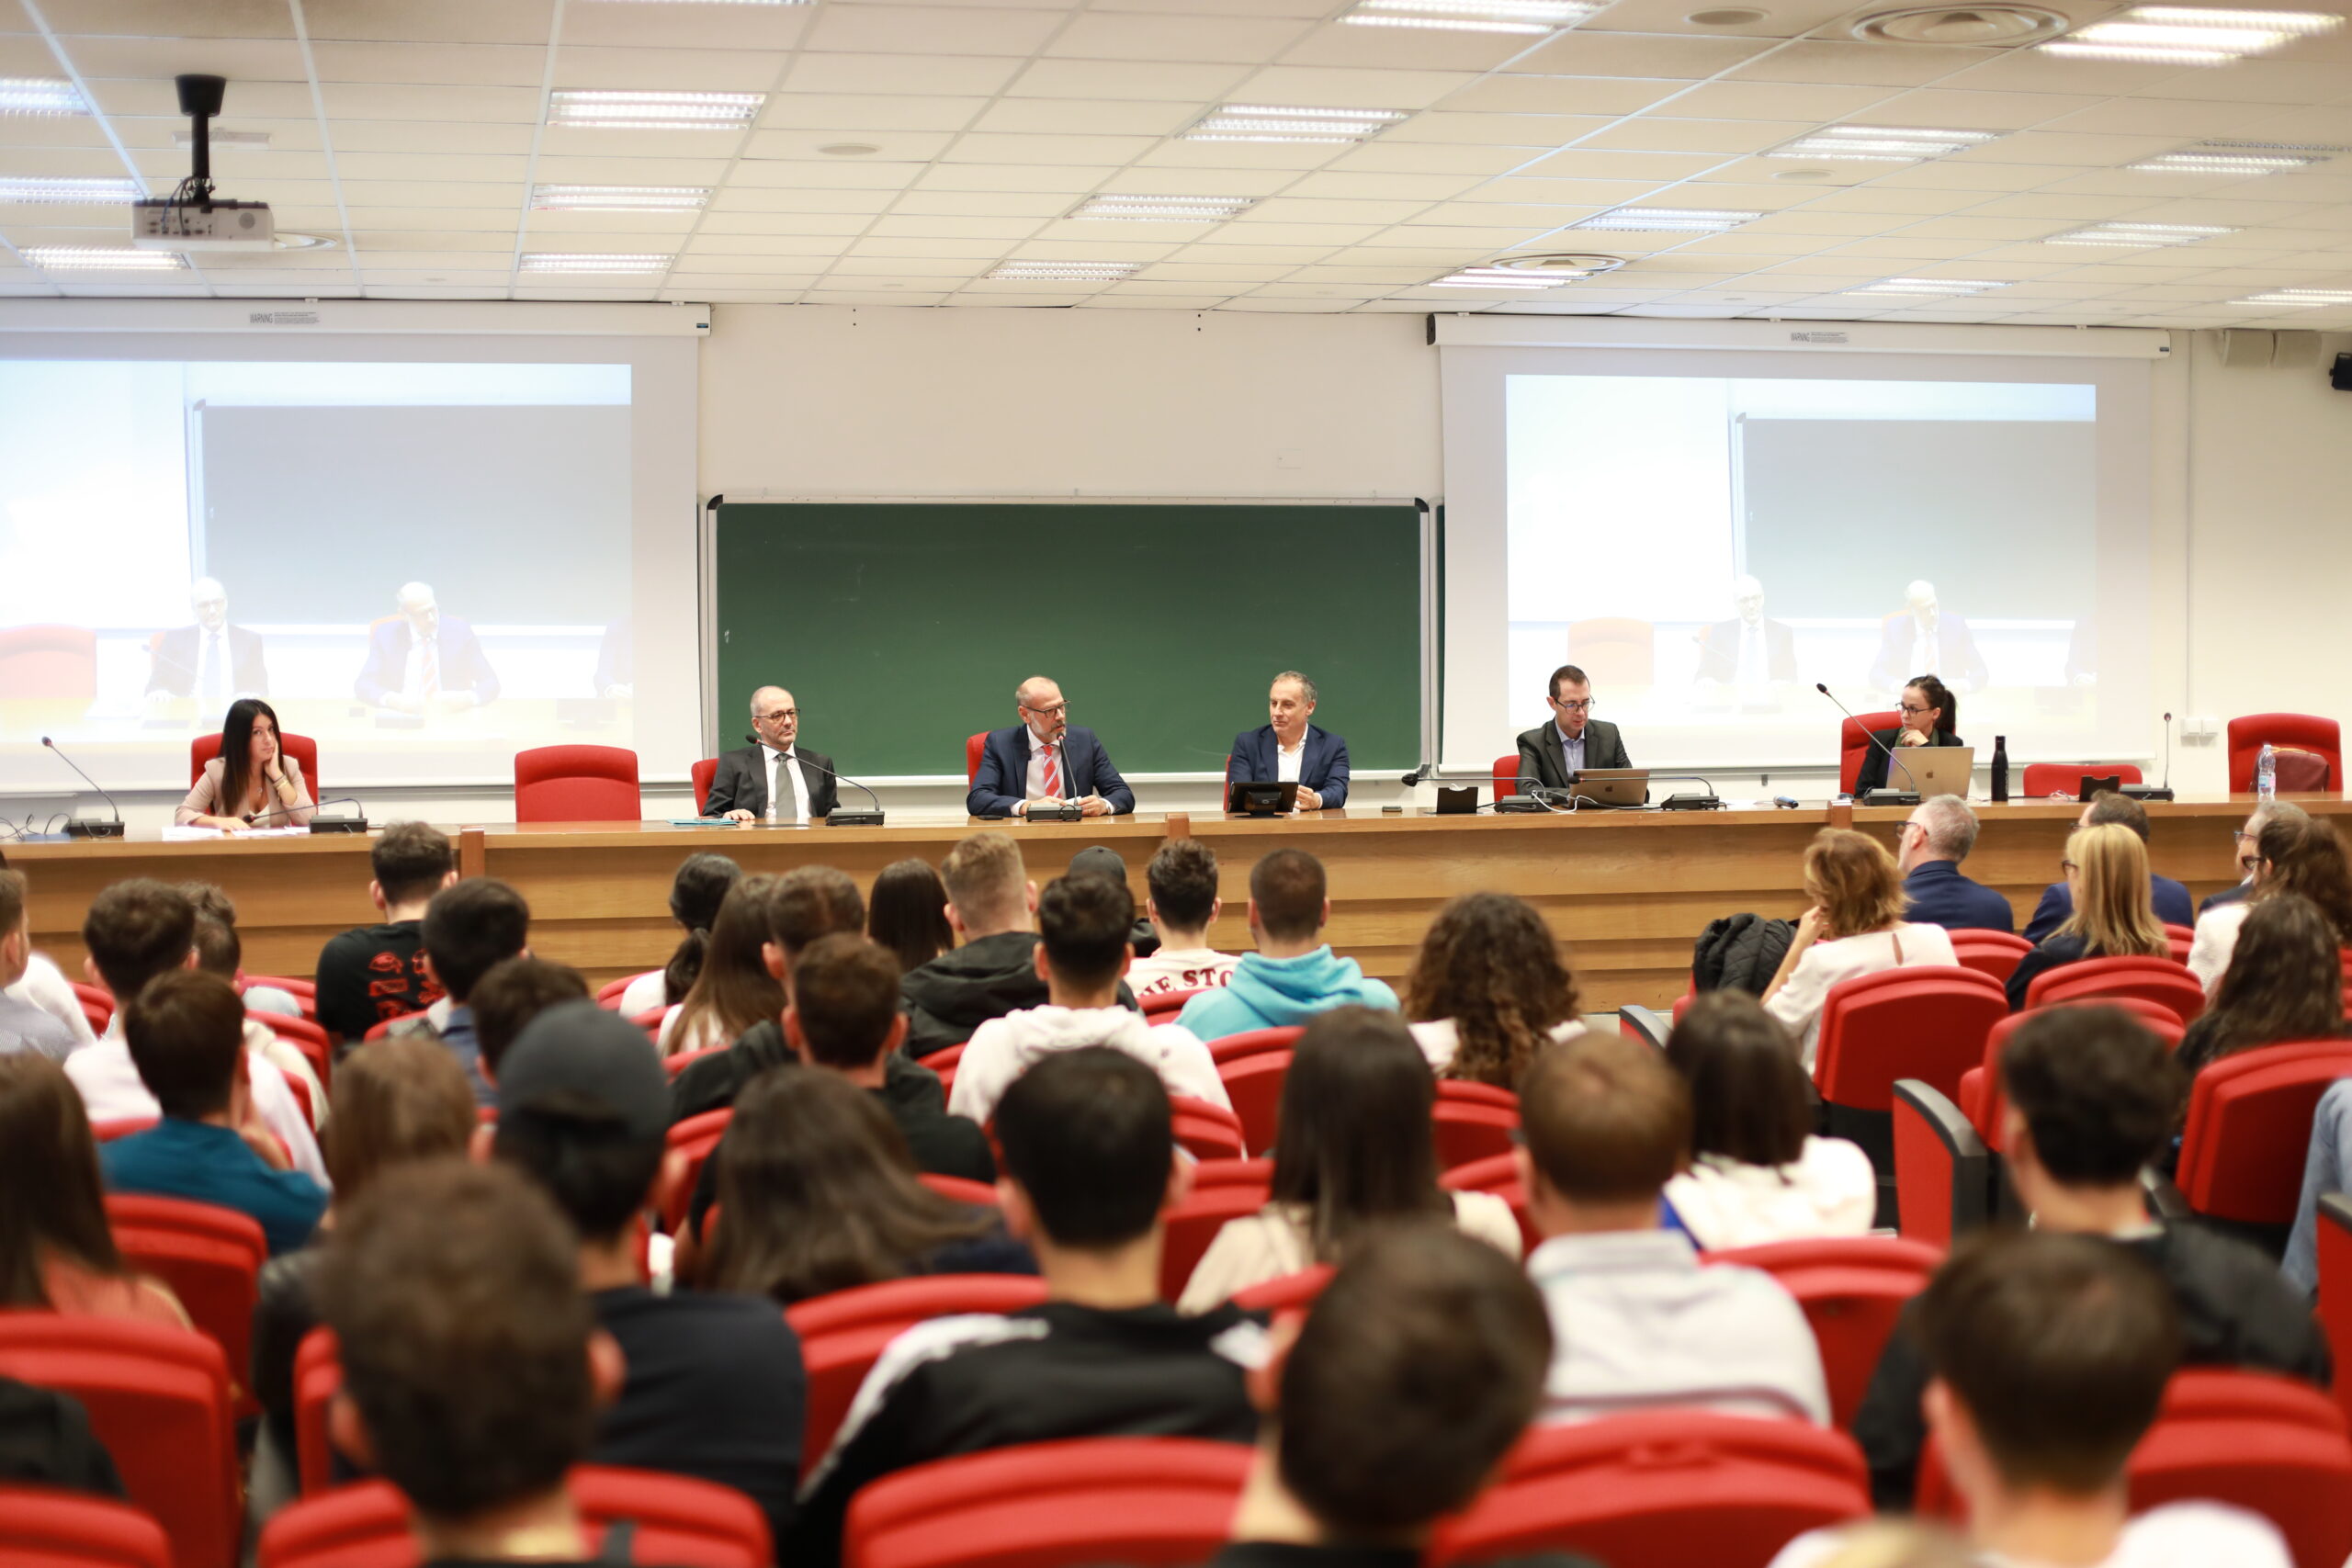 Fisciano: a Campus I incontro “Cybersecurity New Visions”